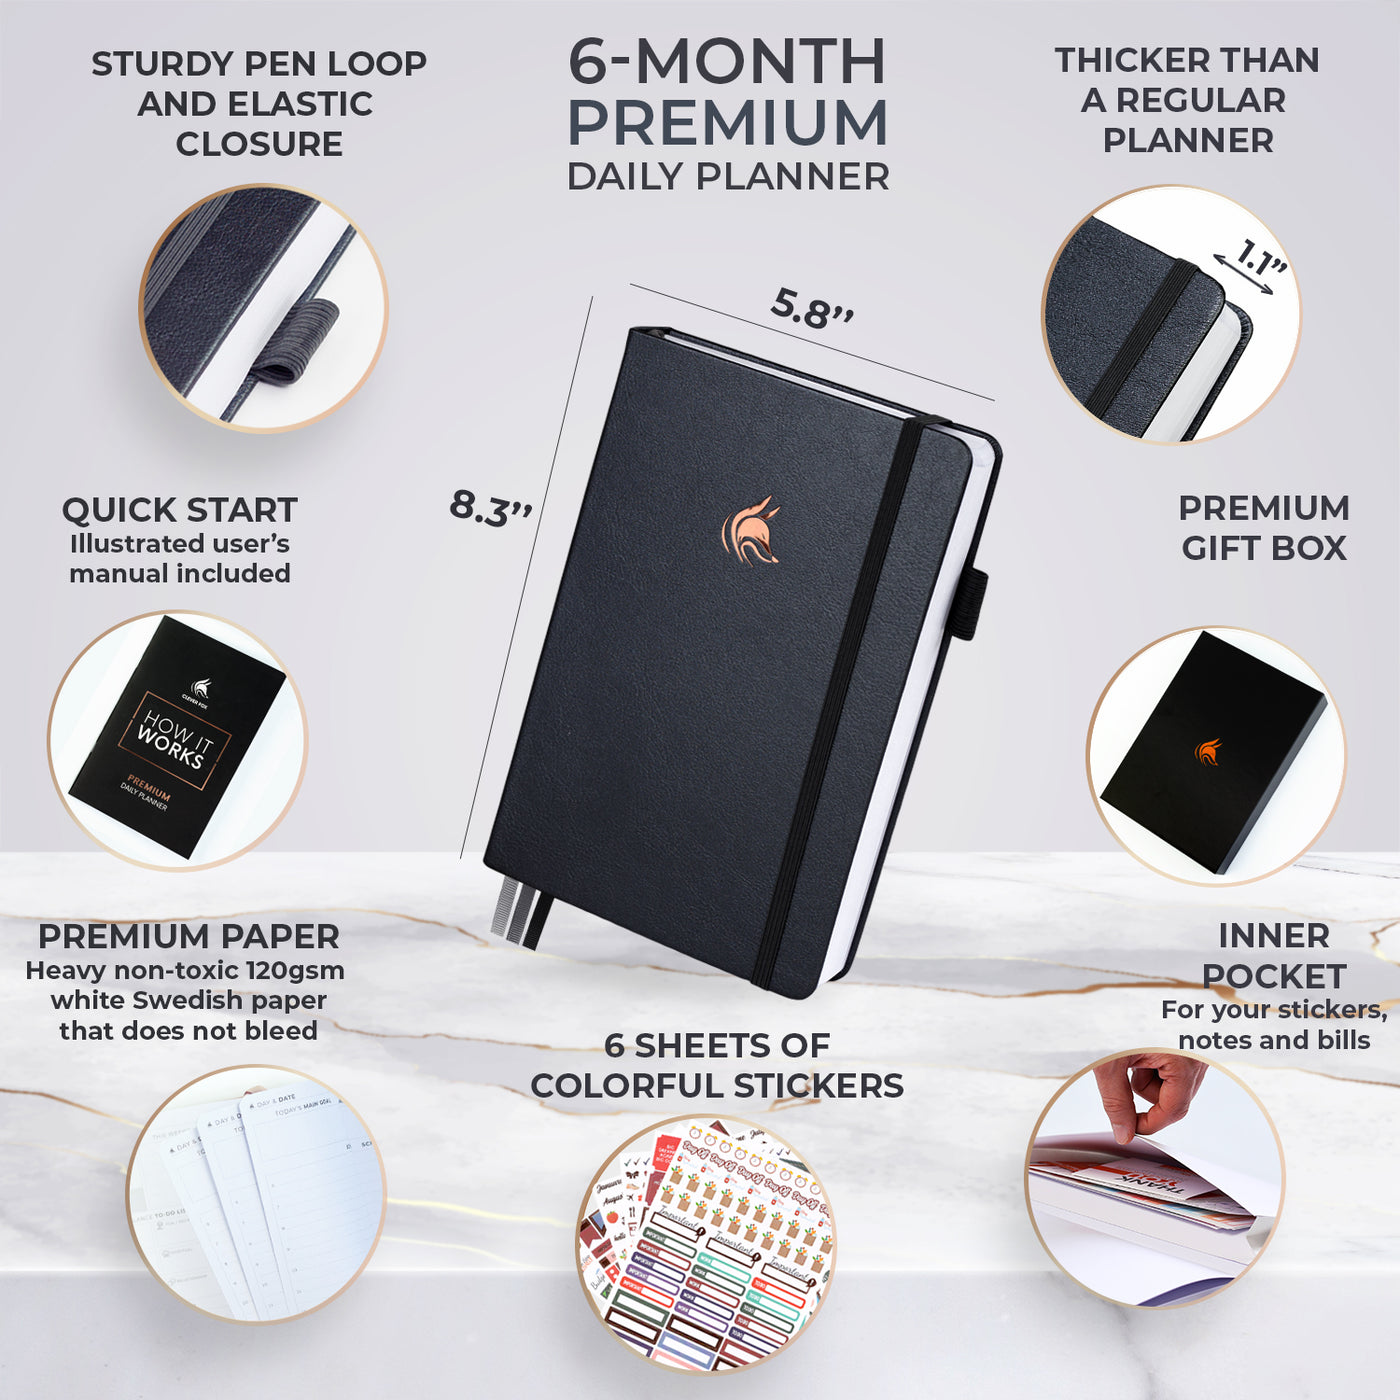 Undated Premium Edition Daily Planner - Take Smalls Steps Each Day & Achieve Your Life Goals